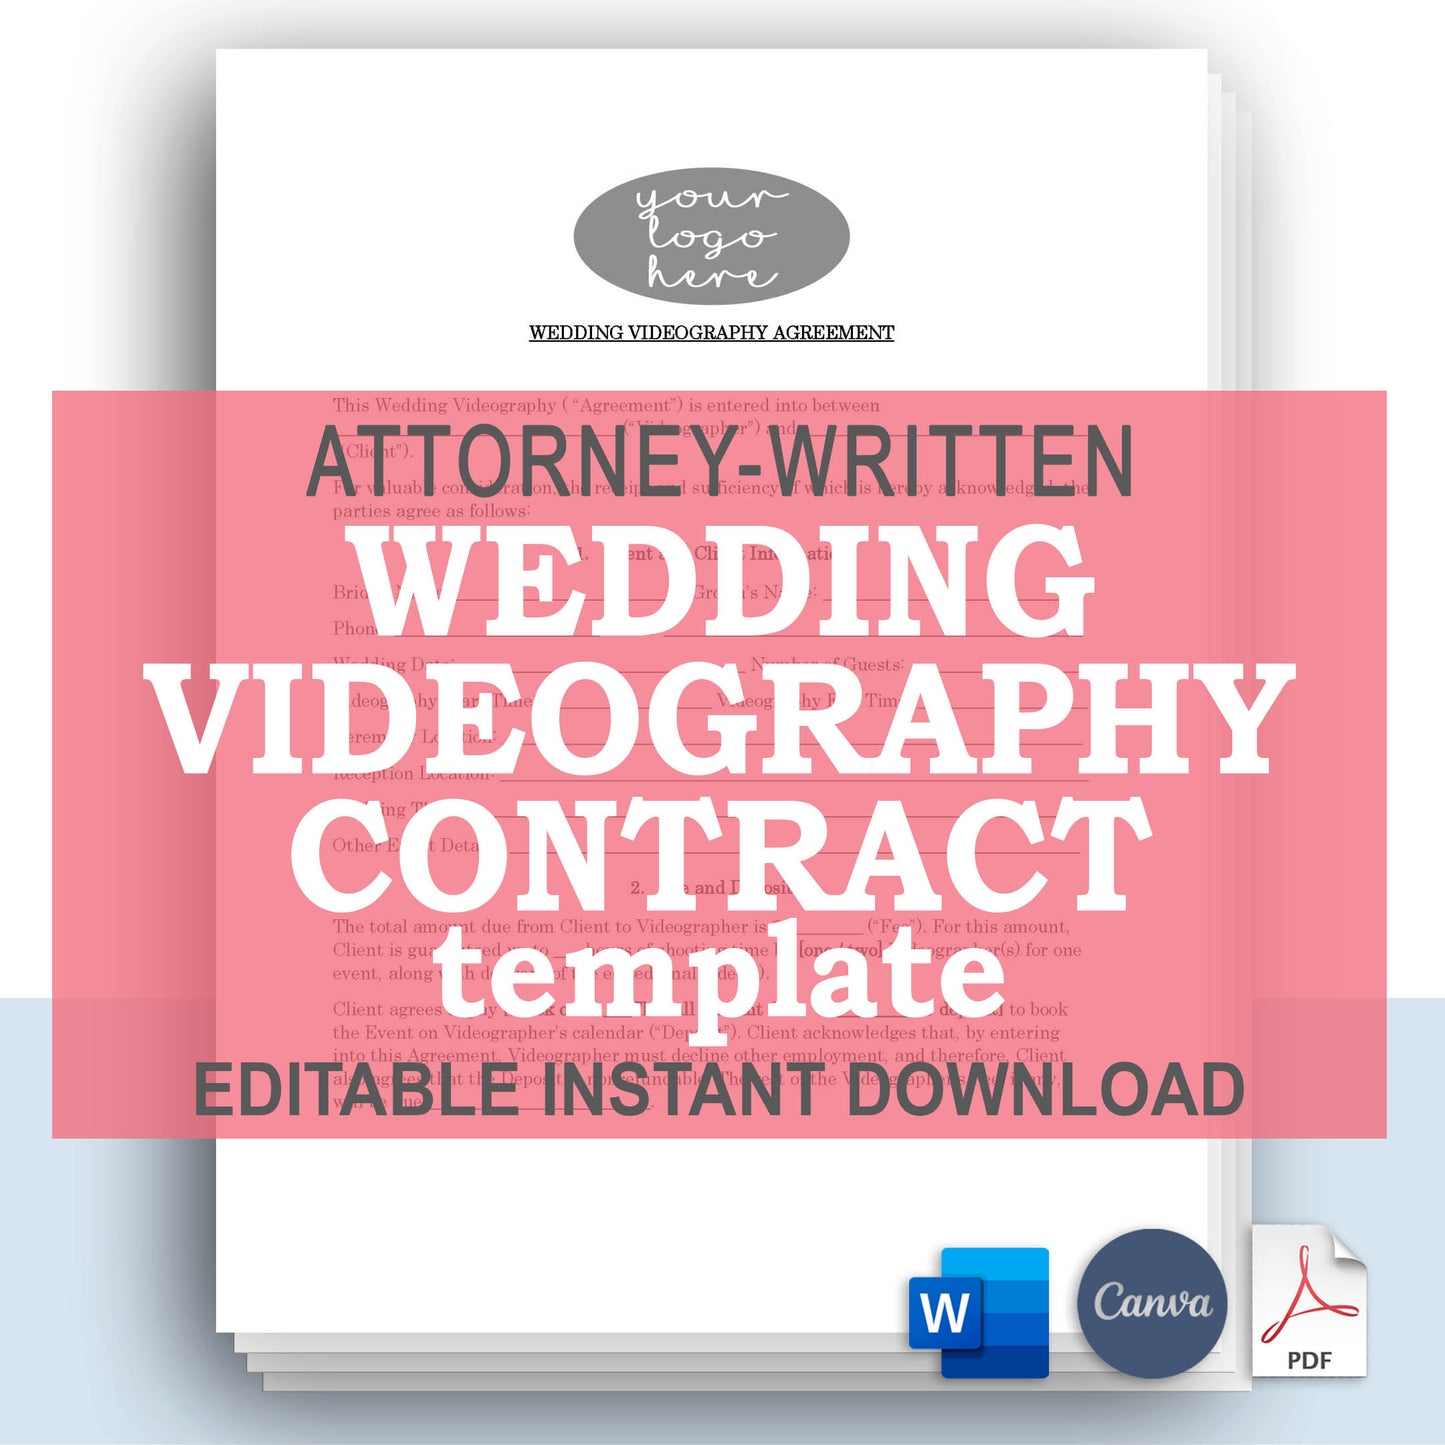 Wedding Videography Contract Template, Attorney-Written Editable Instant Download